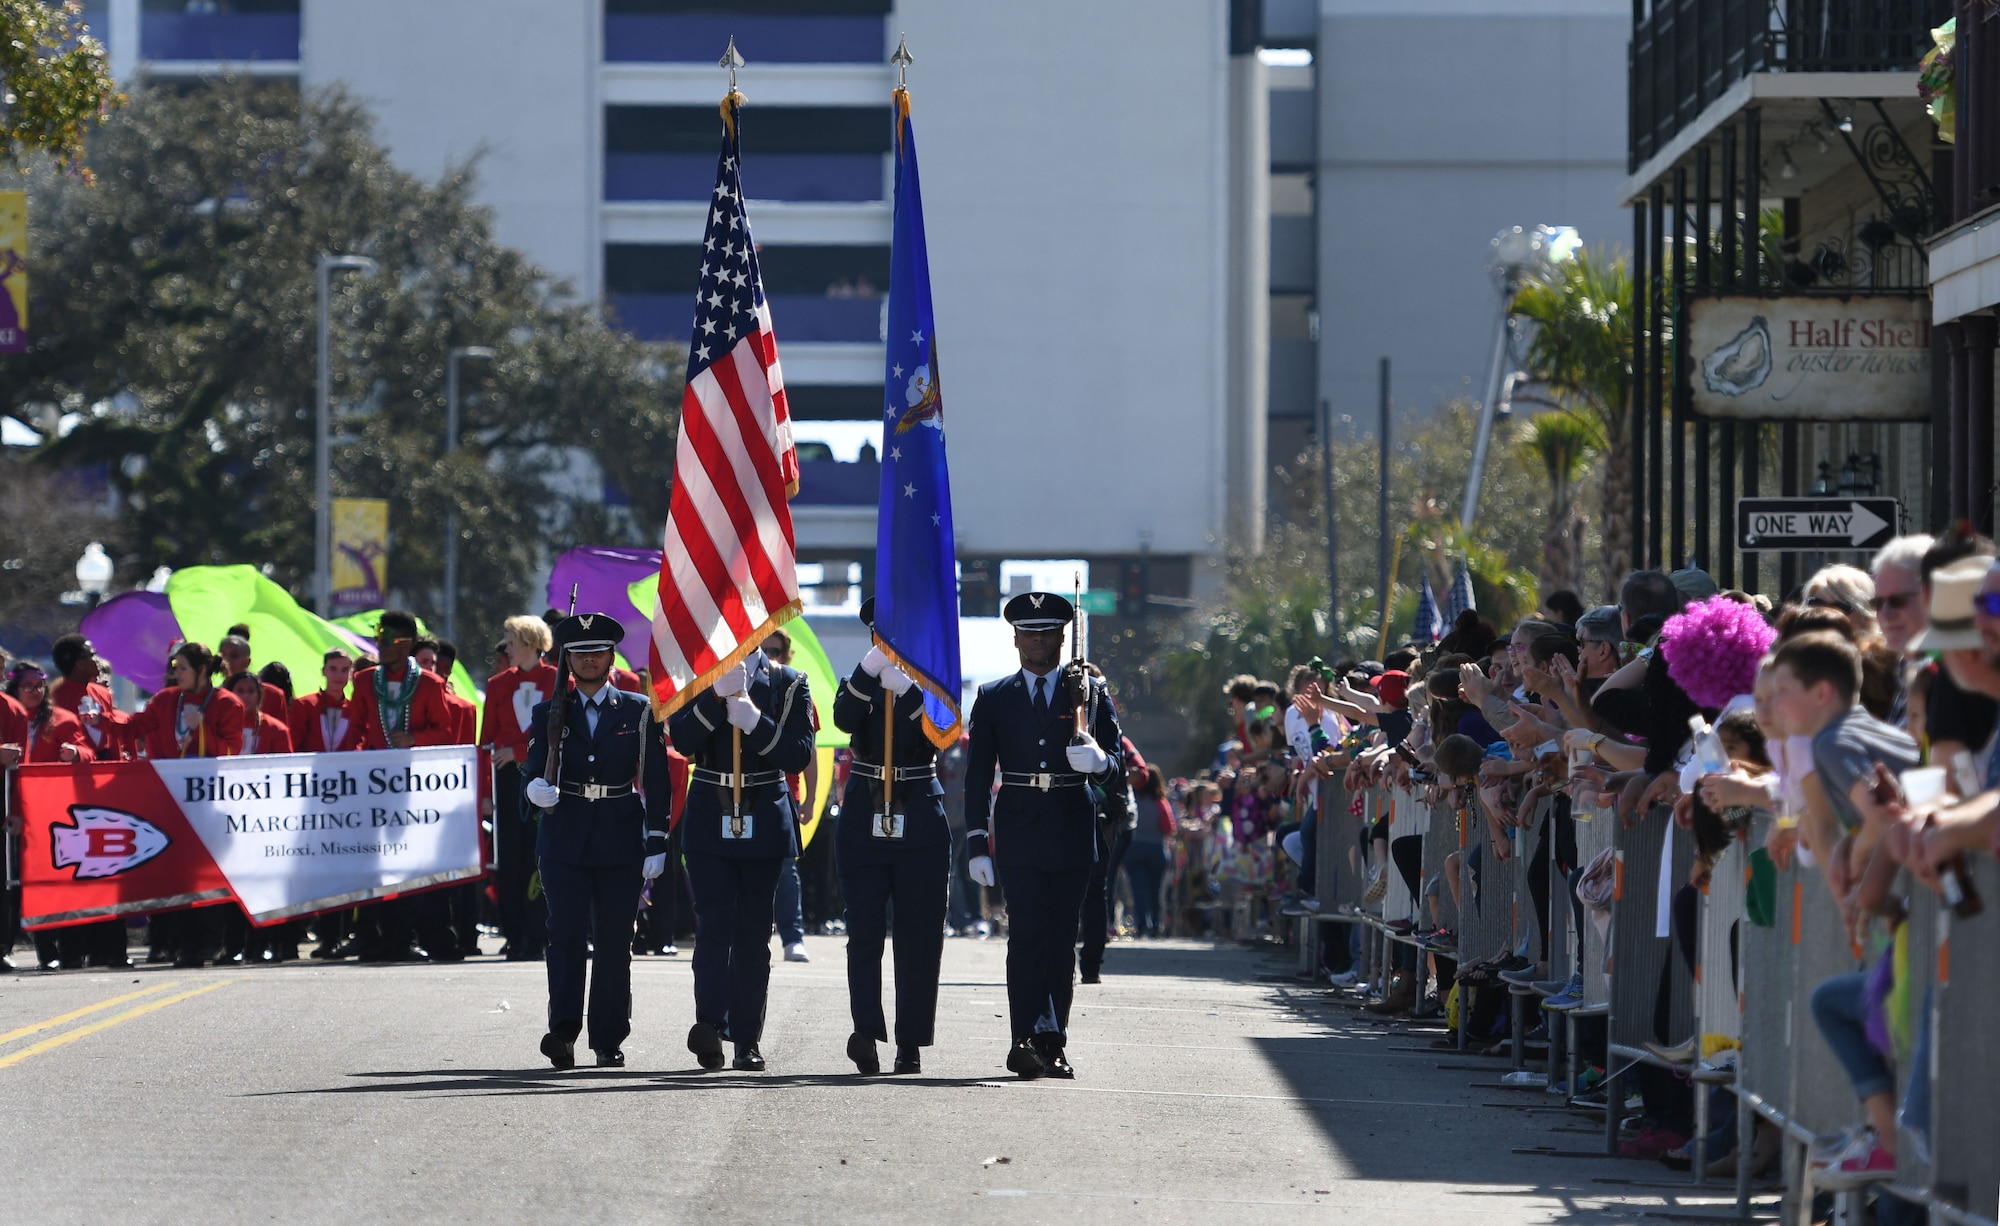 Members of the Keesler Air Force Base Honor Guard lead the Gulf Coast Carnival Association Mardi Gras parade Feb. 13, 2018, in Biloxi, Mississippi. Keesler personnel participate in local parades every Mardi Gras season to show their support of the communities surrounding the installation. (U.S. Air Force photo by Kemberly Groue)